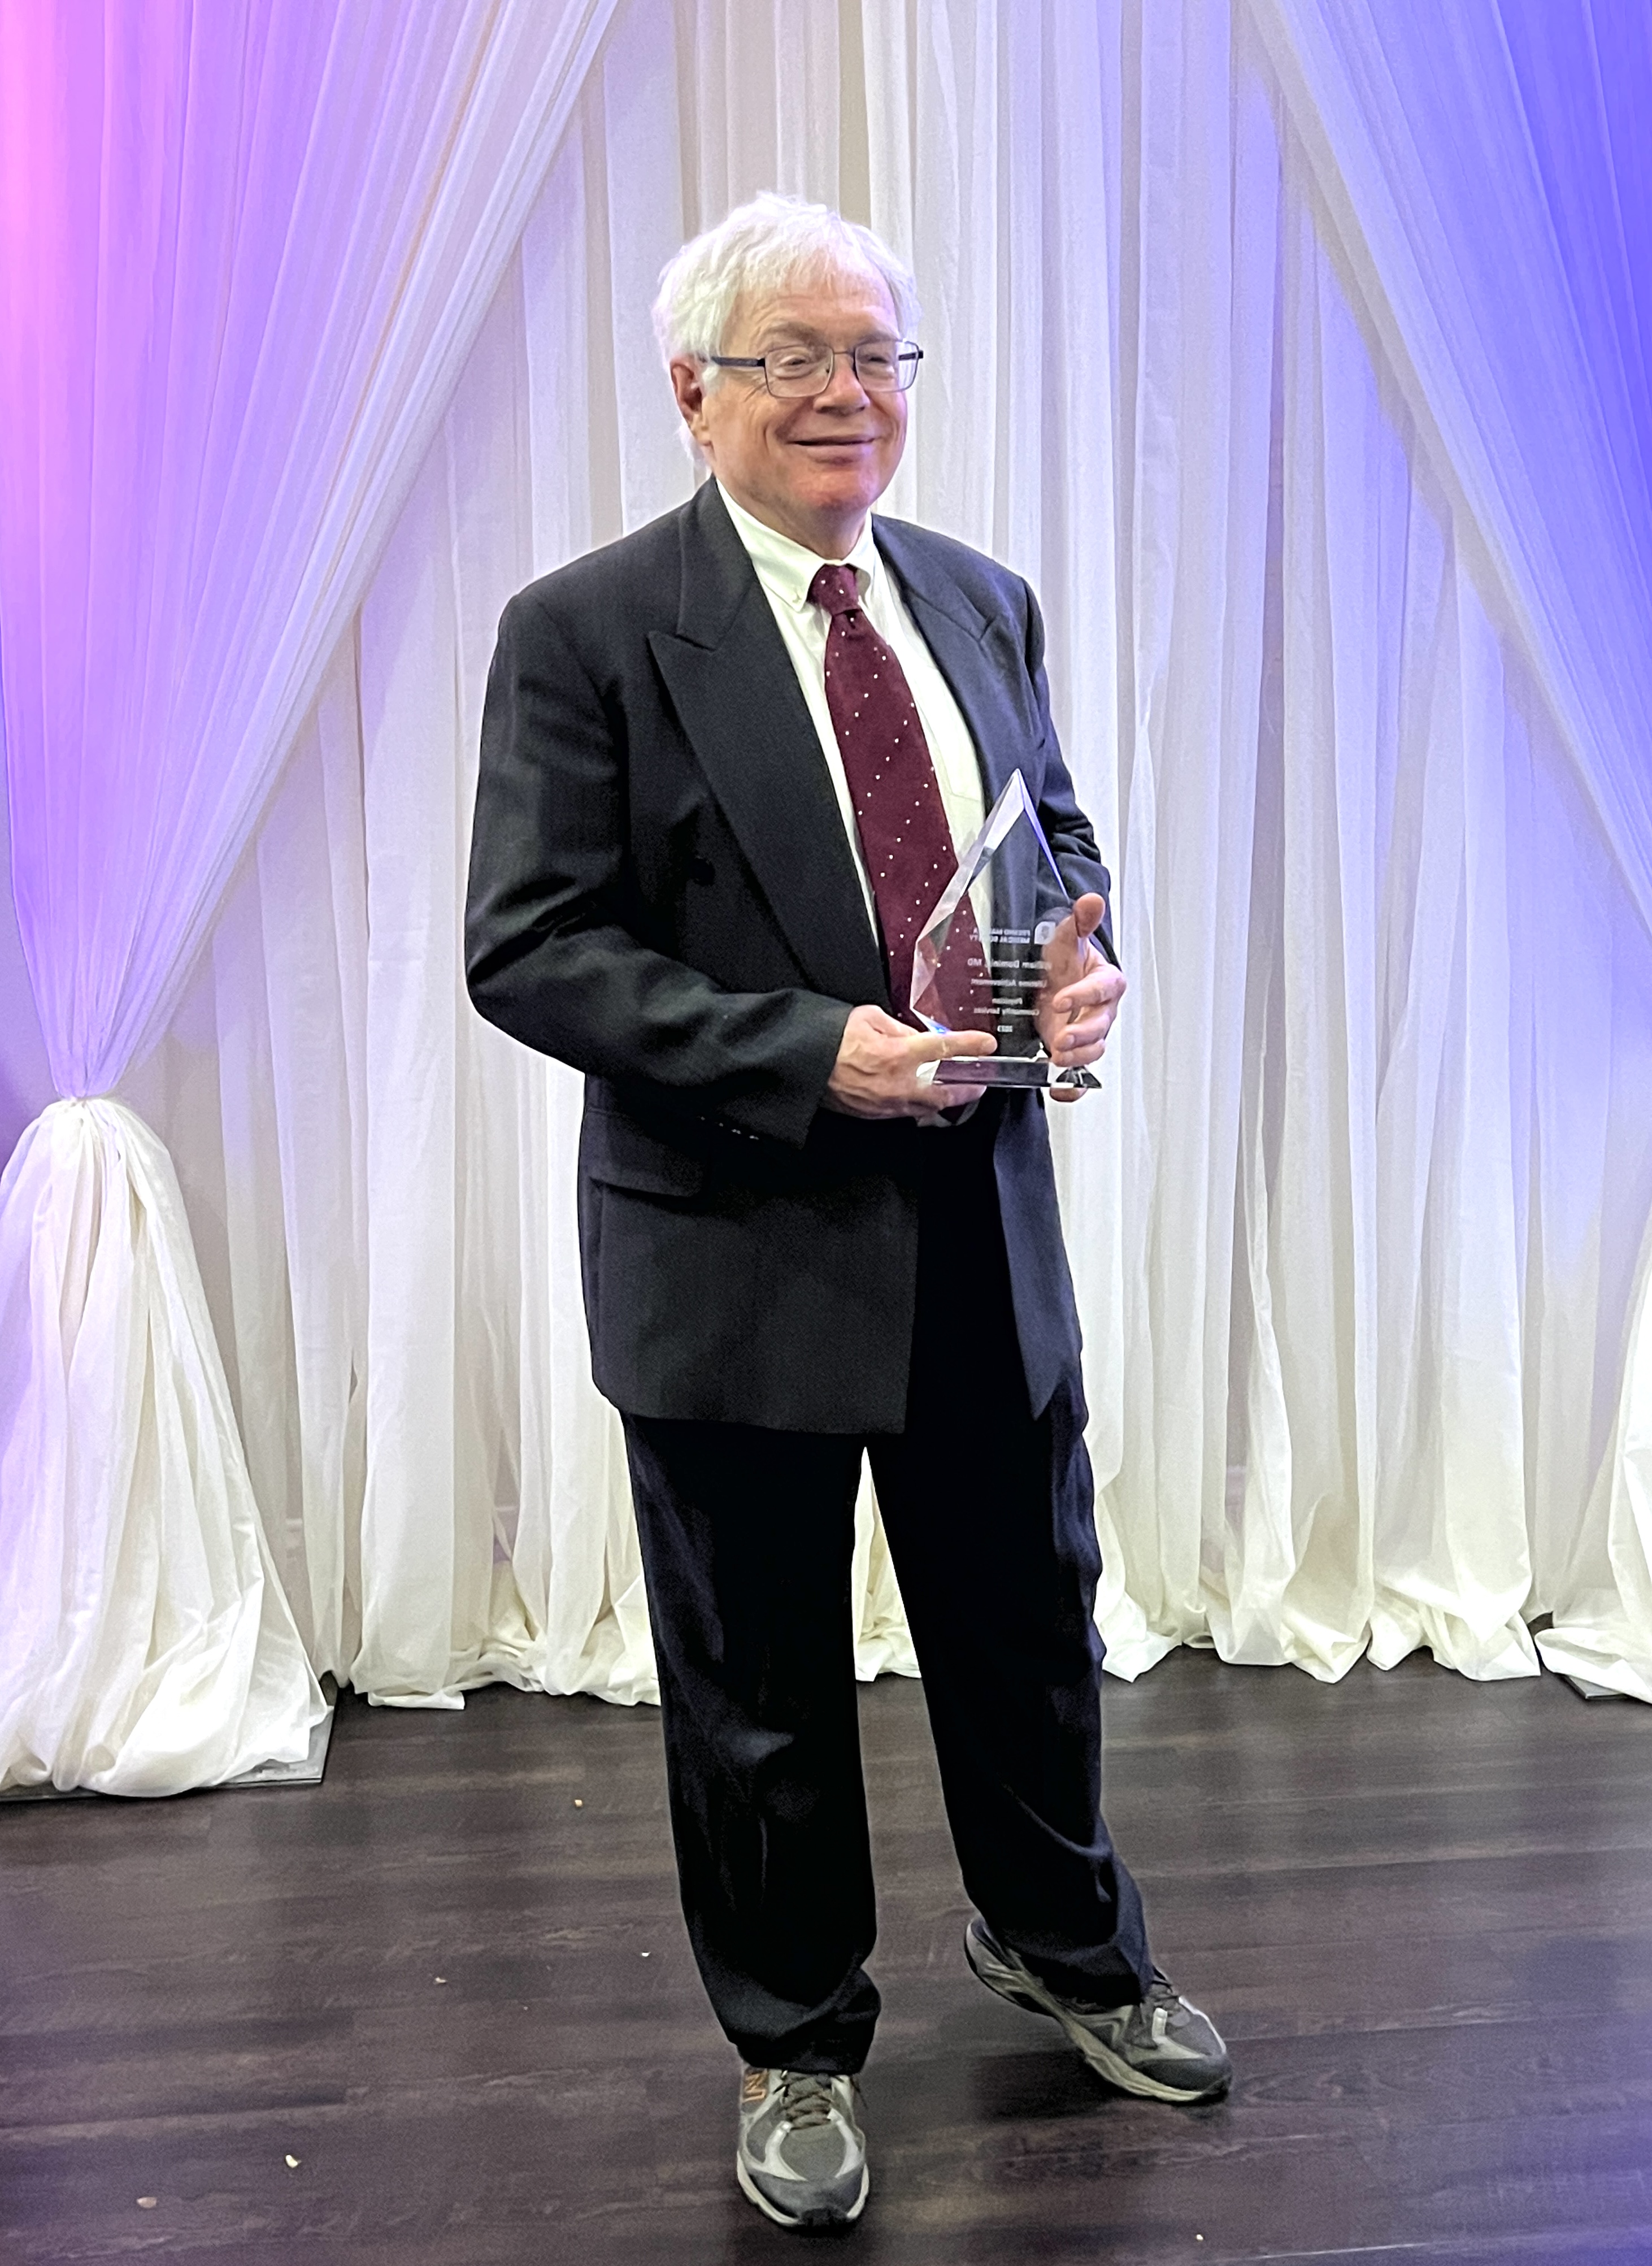 Dr. William Dominic posing with an award